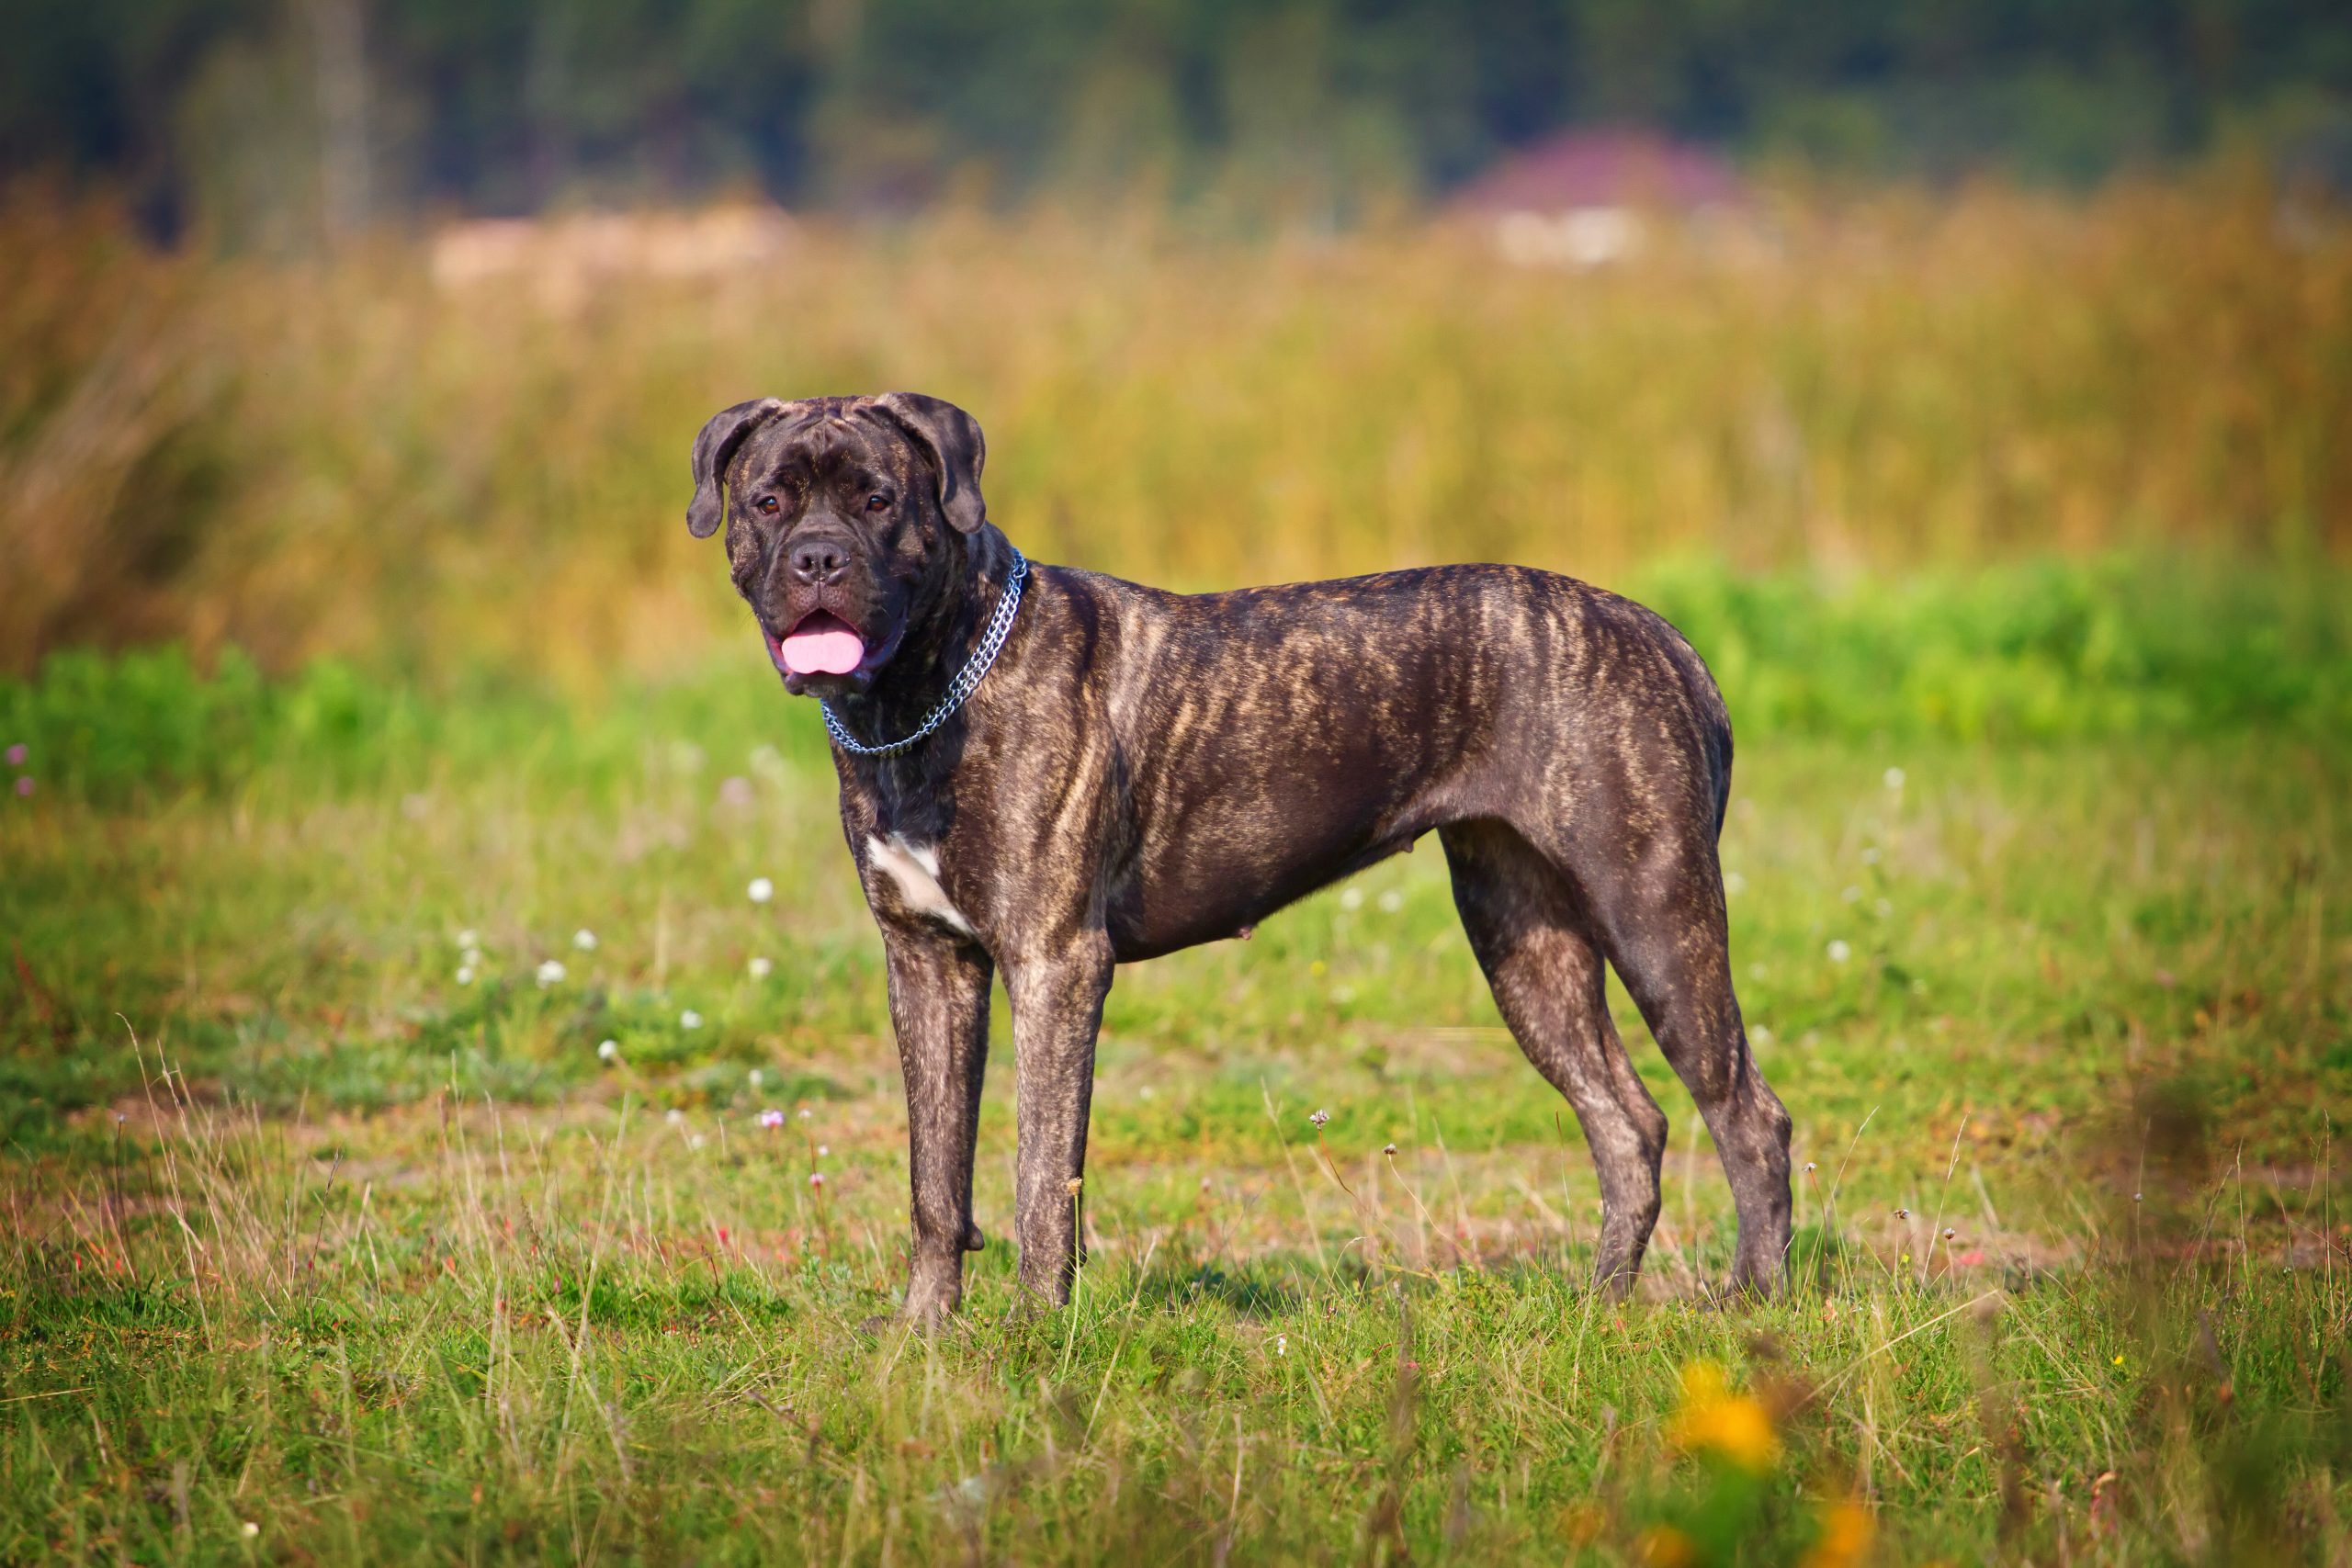 Brindle bullmastiff posing standing on a field in the summer